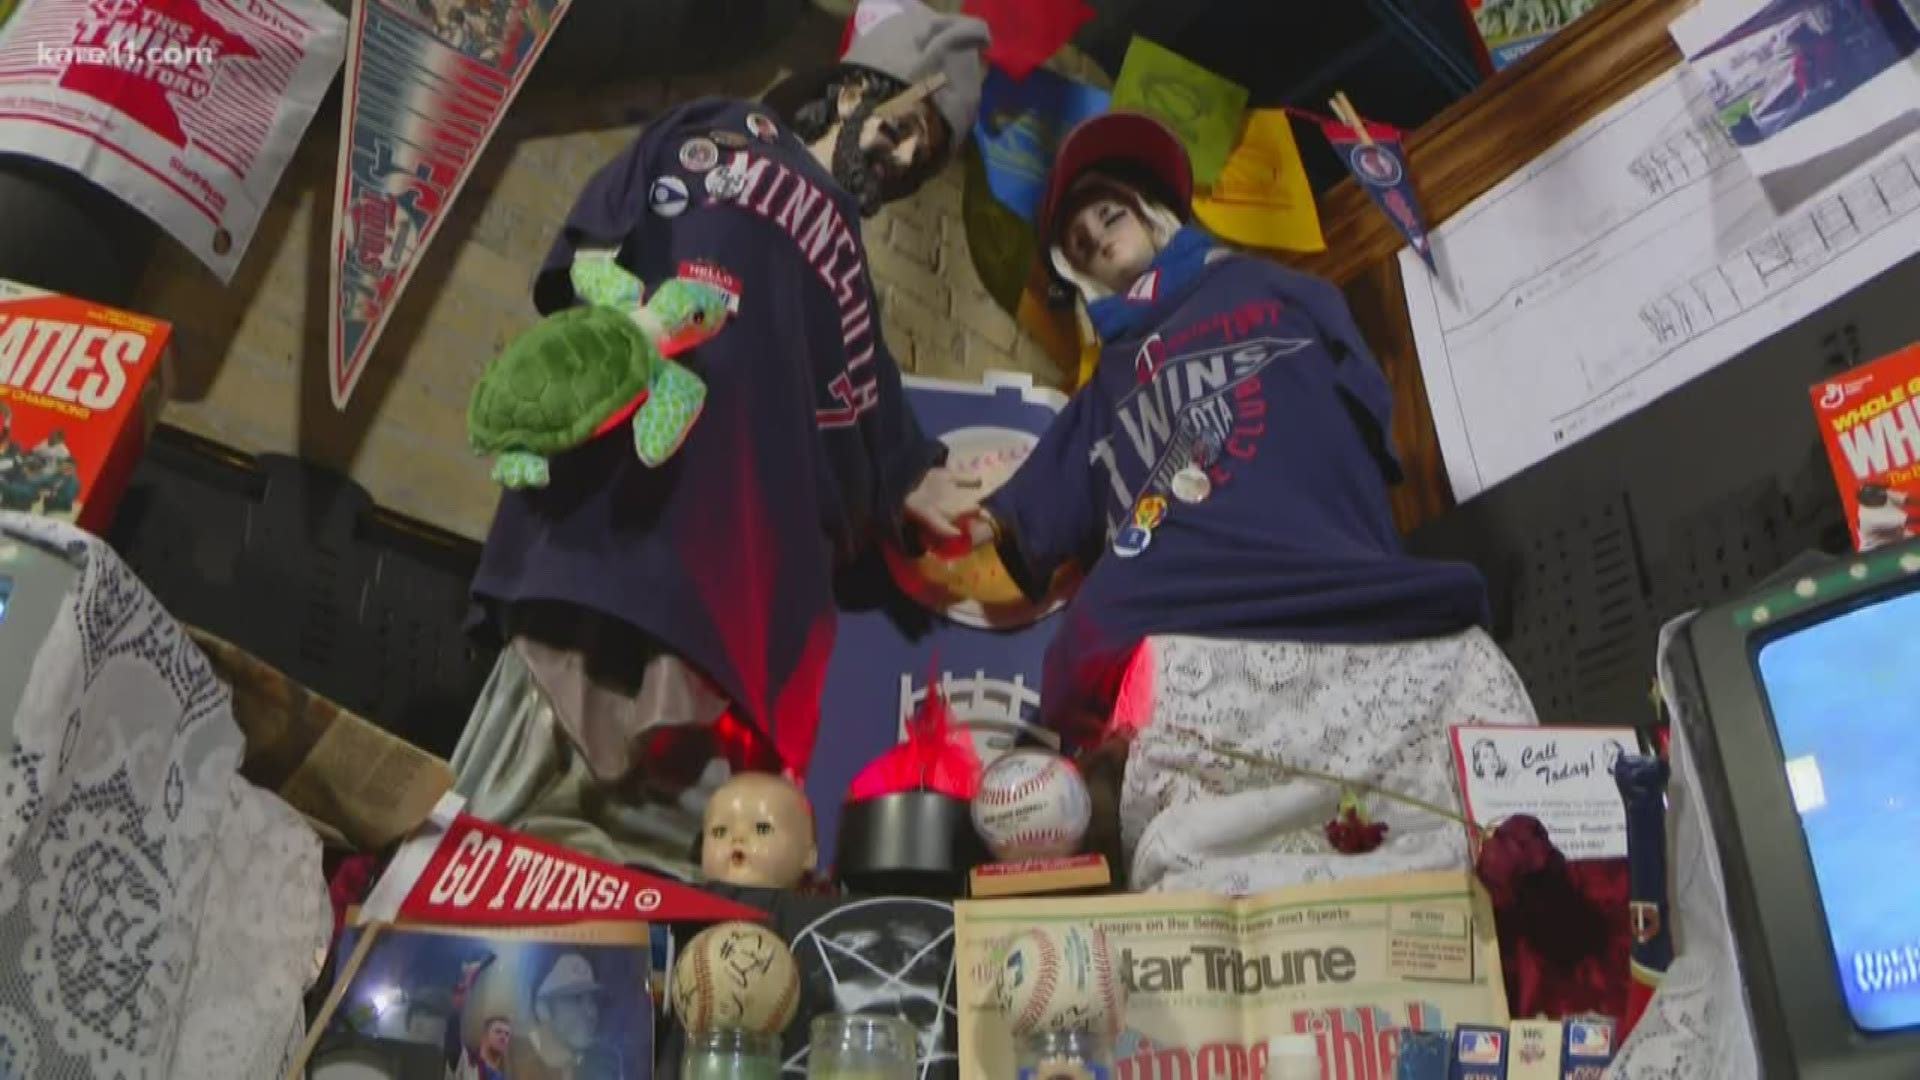 Michael Haas and Tom Johnson created a Twins shrine in April at Darby's Pub and Grill.